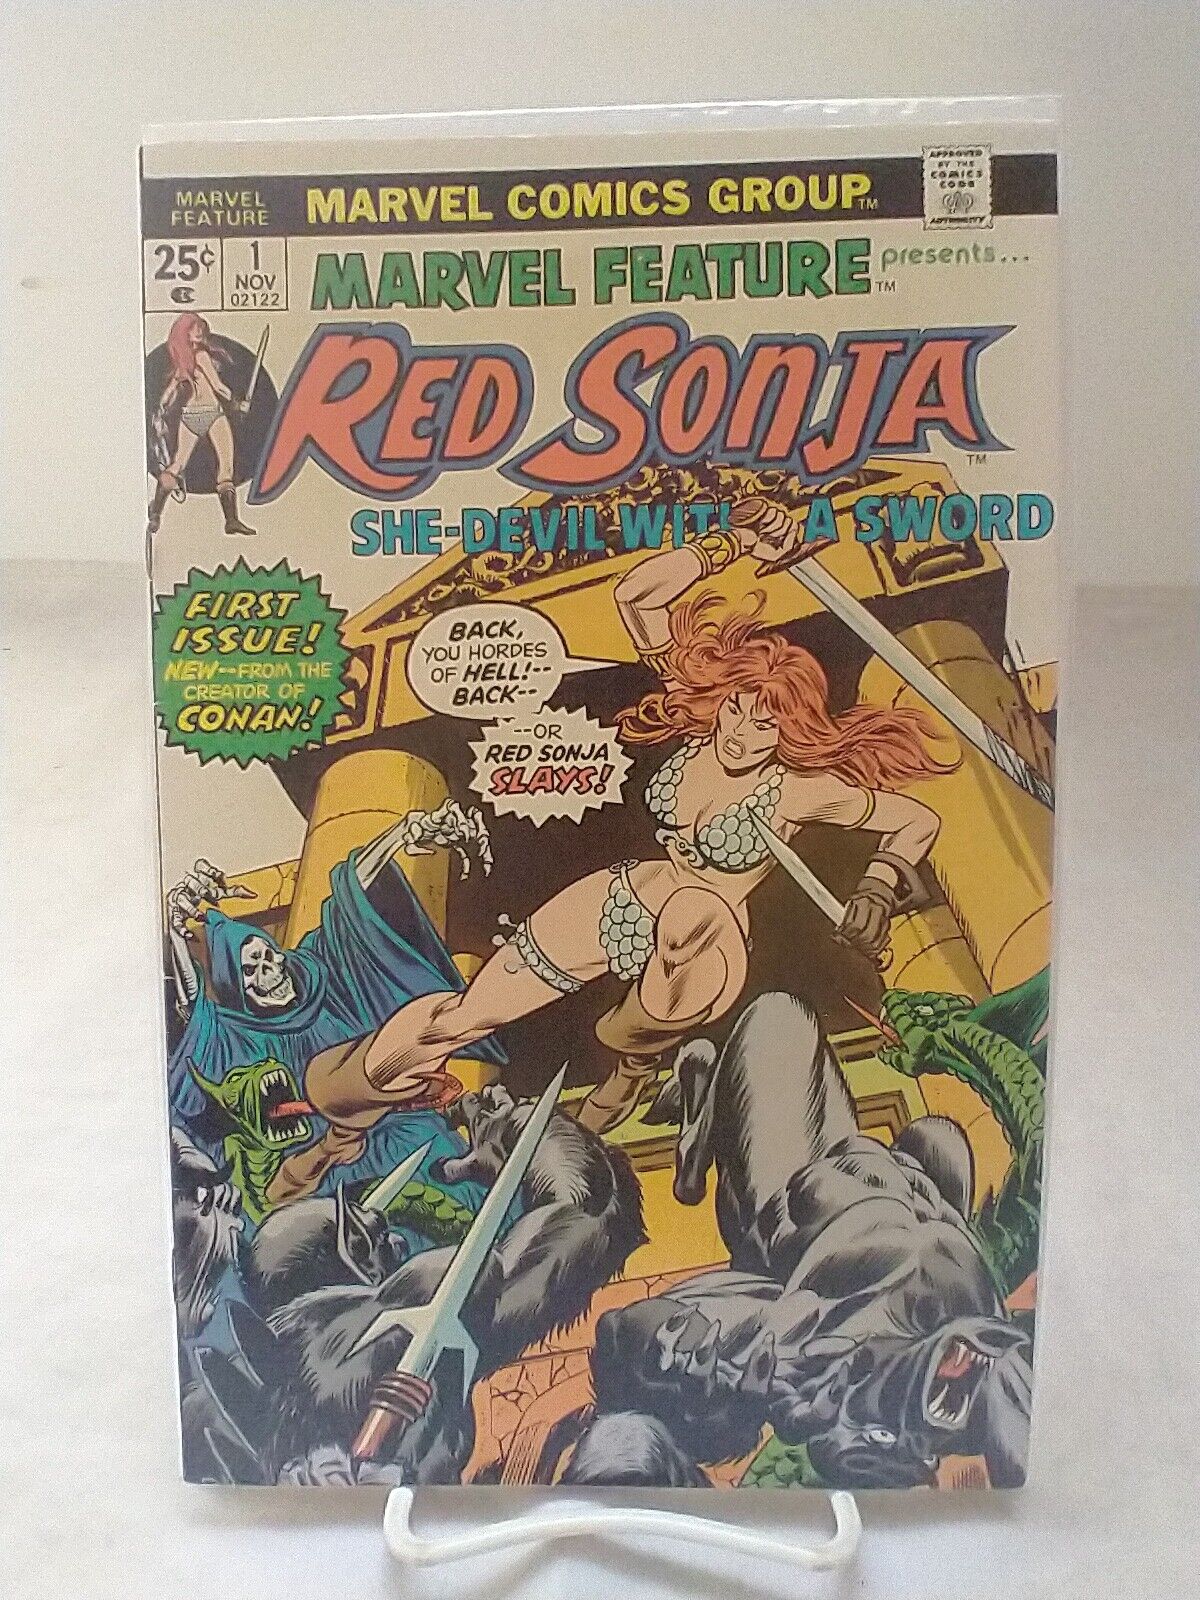 Marvel Feature (1975) #1 VF. Red Sonja